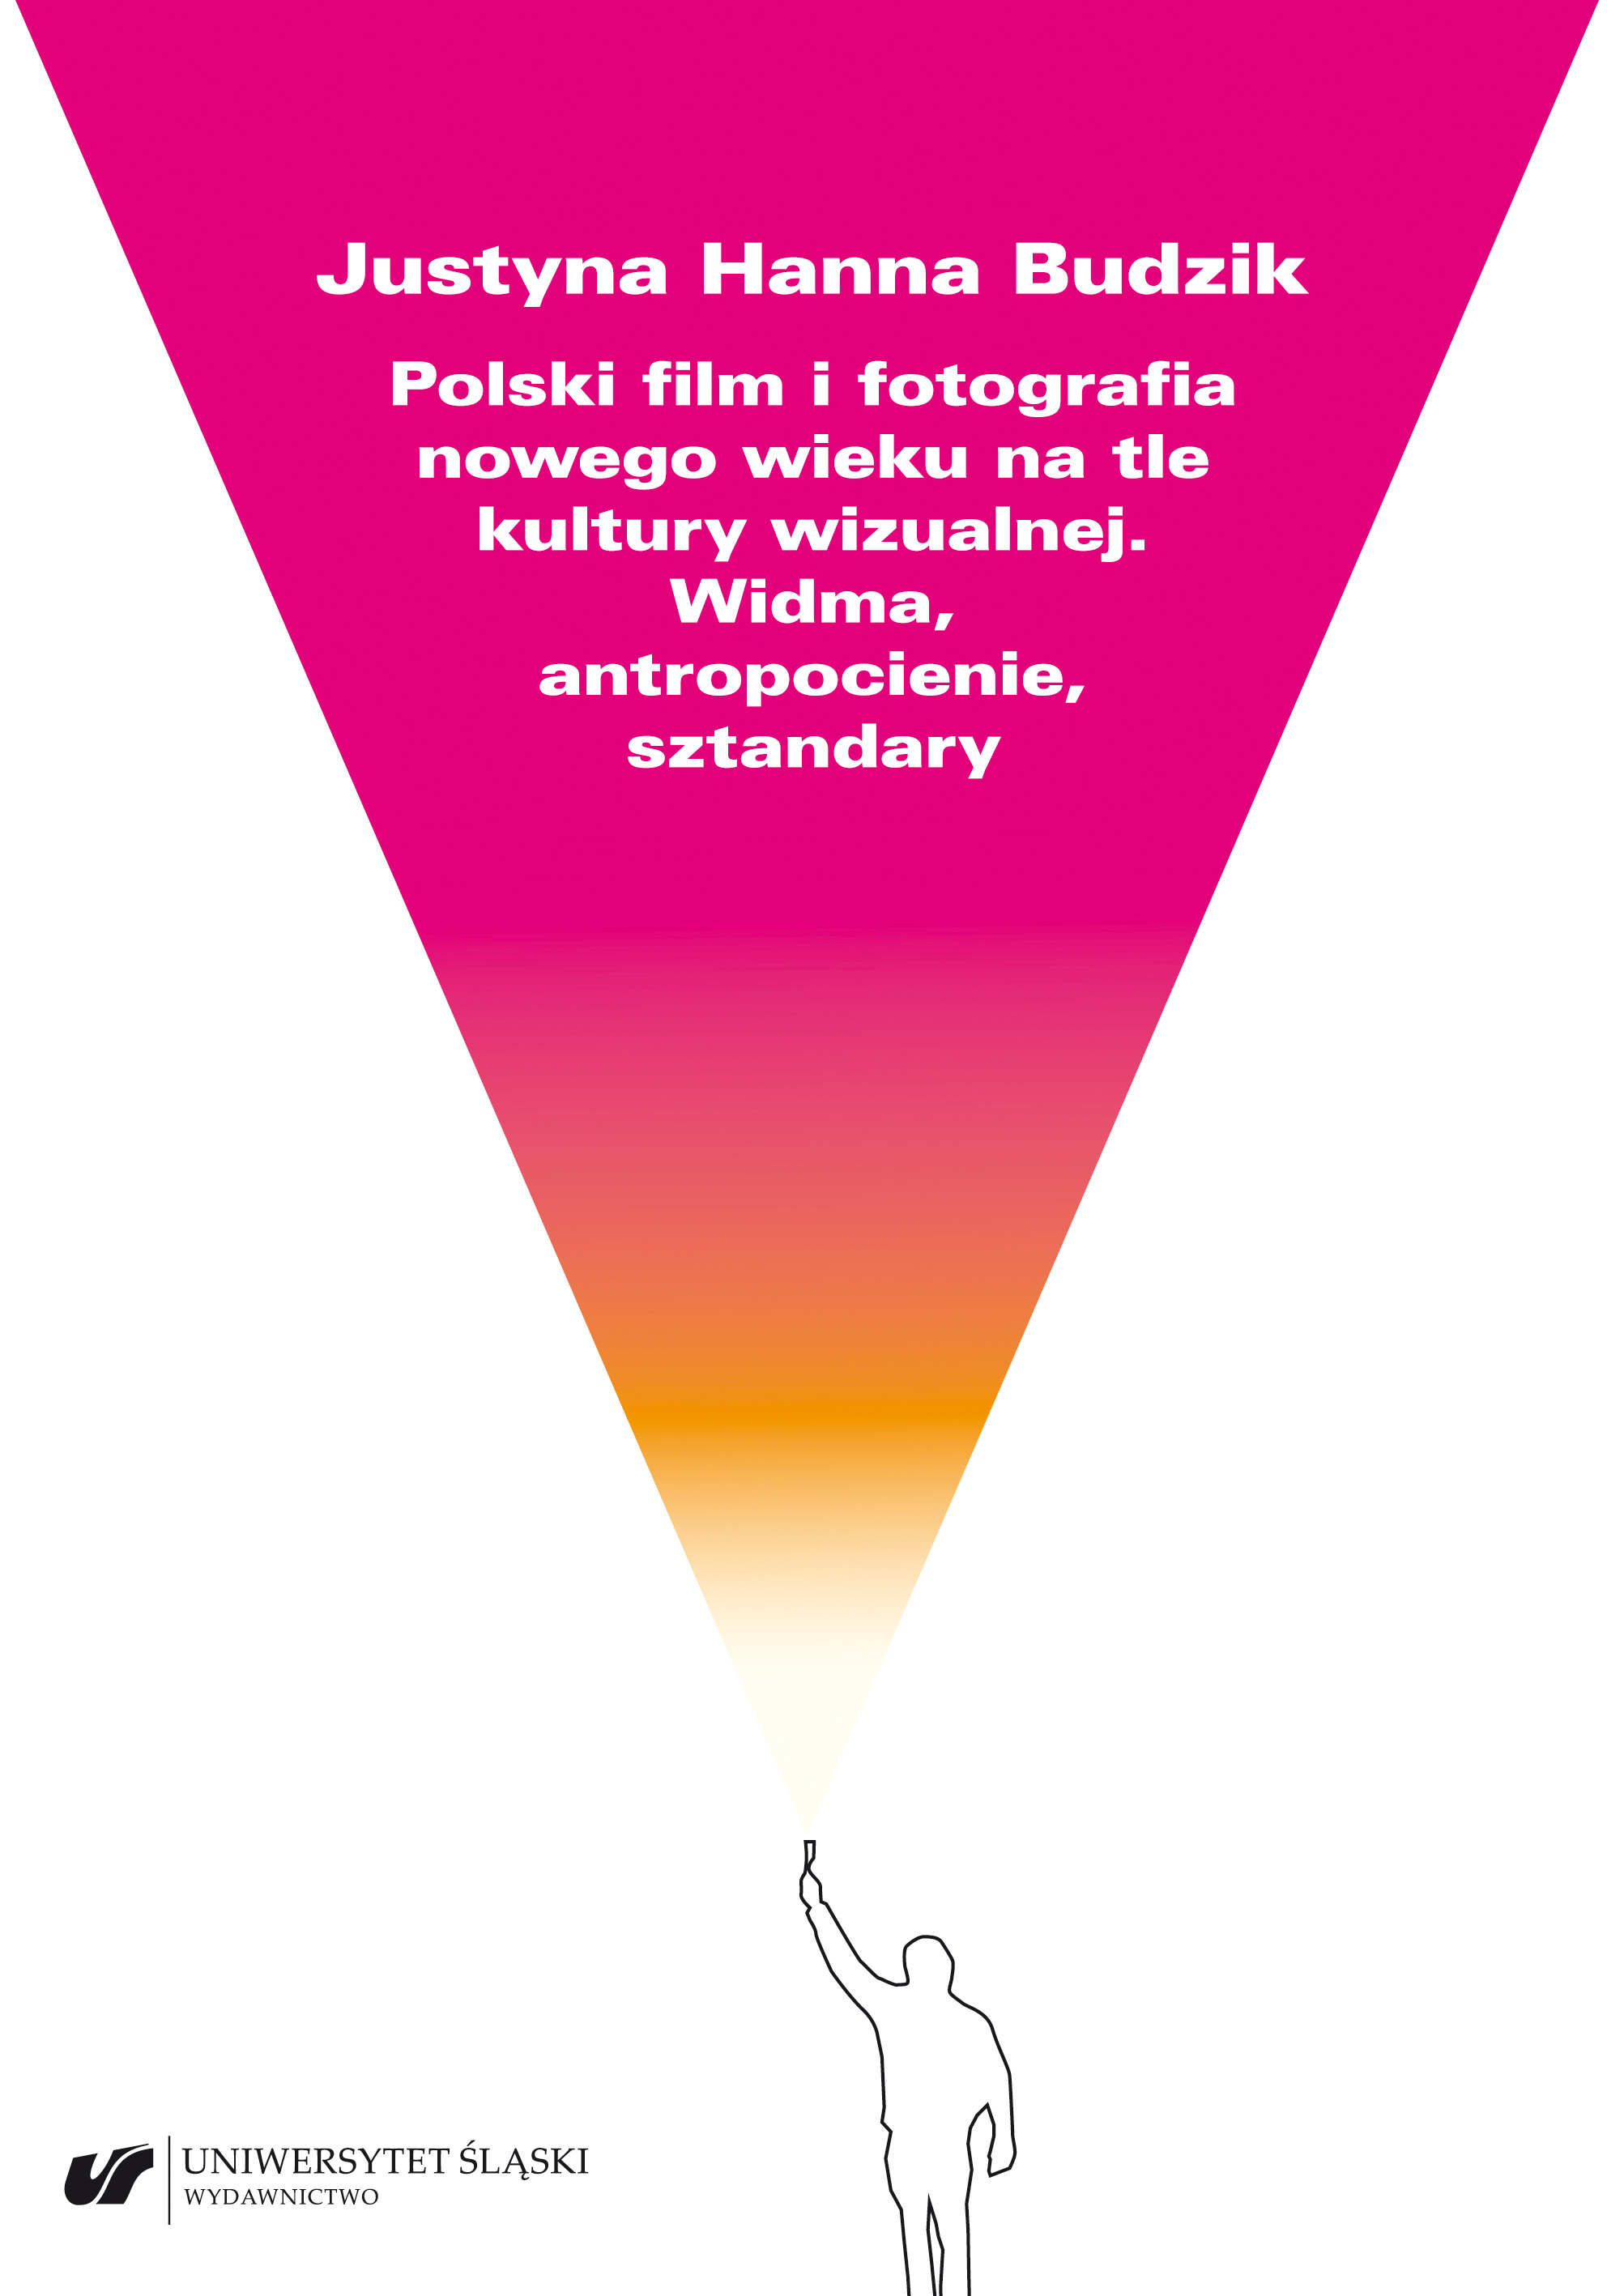 Polish Film and Photography of the New Century in the Context of Visual Culture. Spectres, Shadows of the Anthropocene, Banners